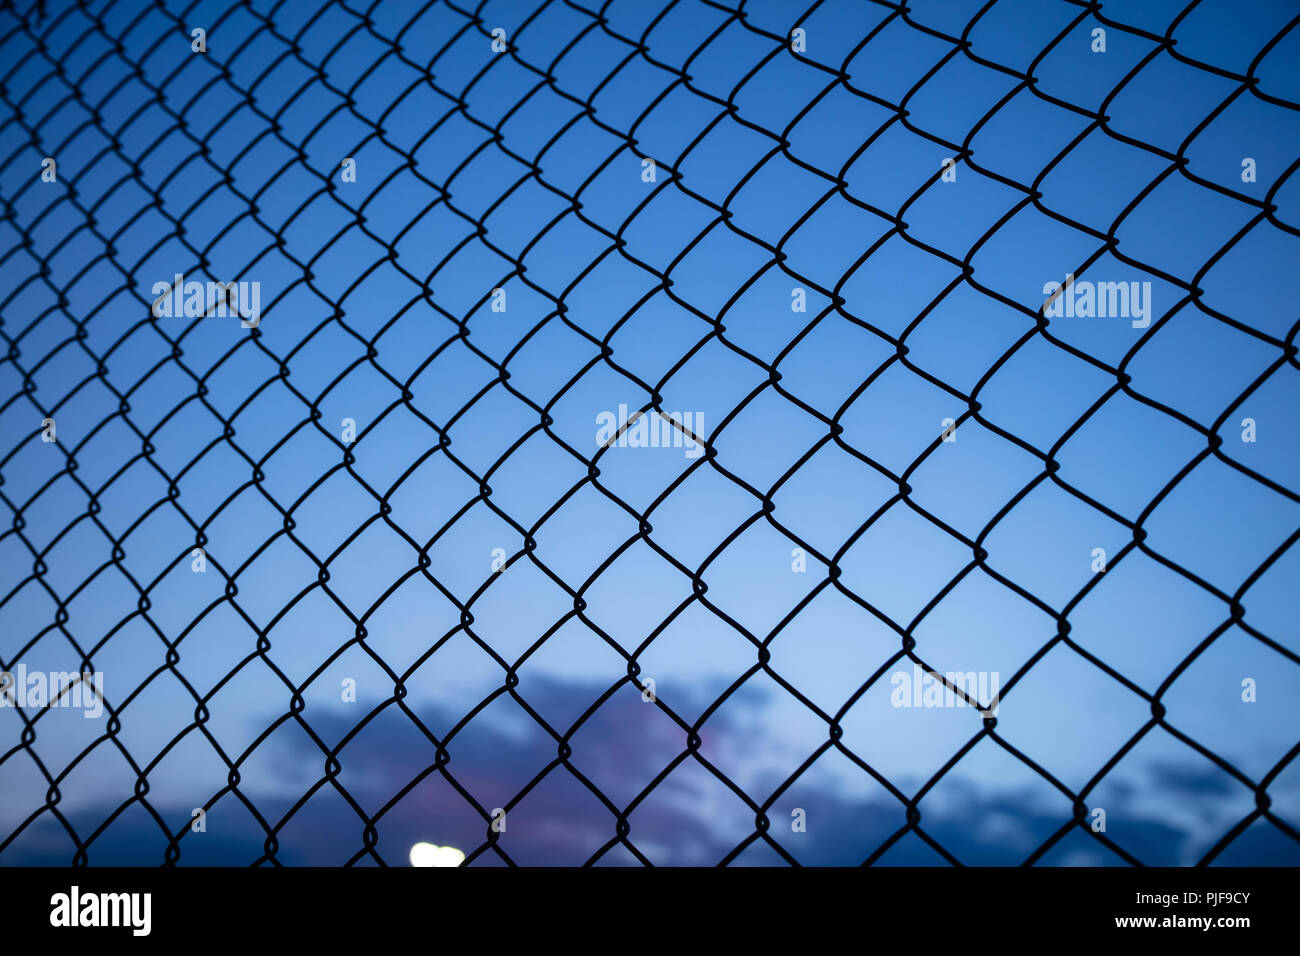 Dark blue sky through wire mesh fence. Blur background, close up view of link cage, wallpaper. Stock Photo